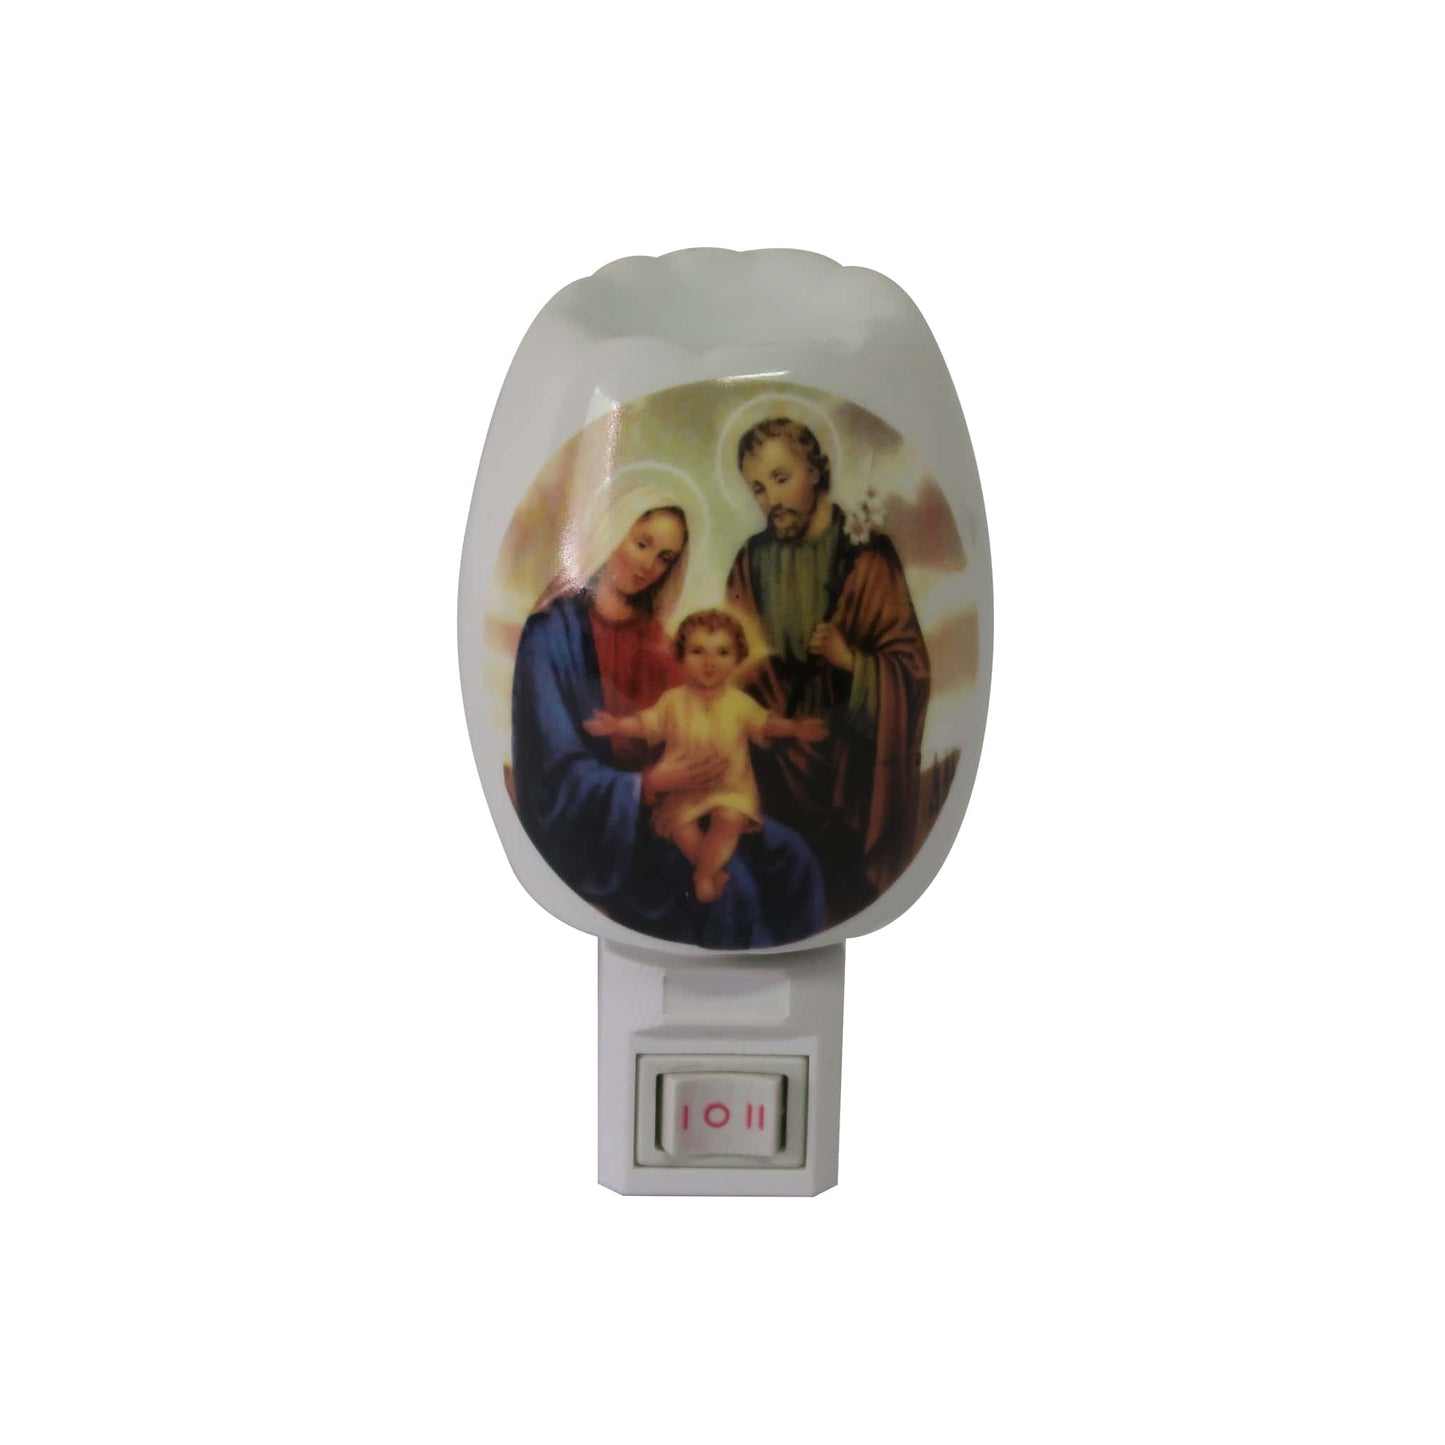 Ceramic Nightlight with Holy Images